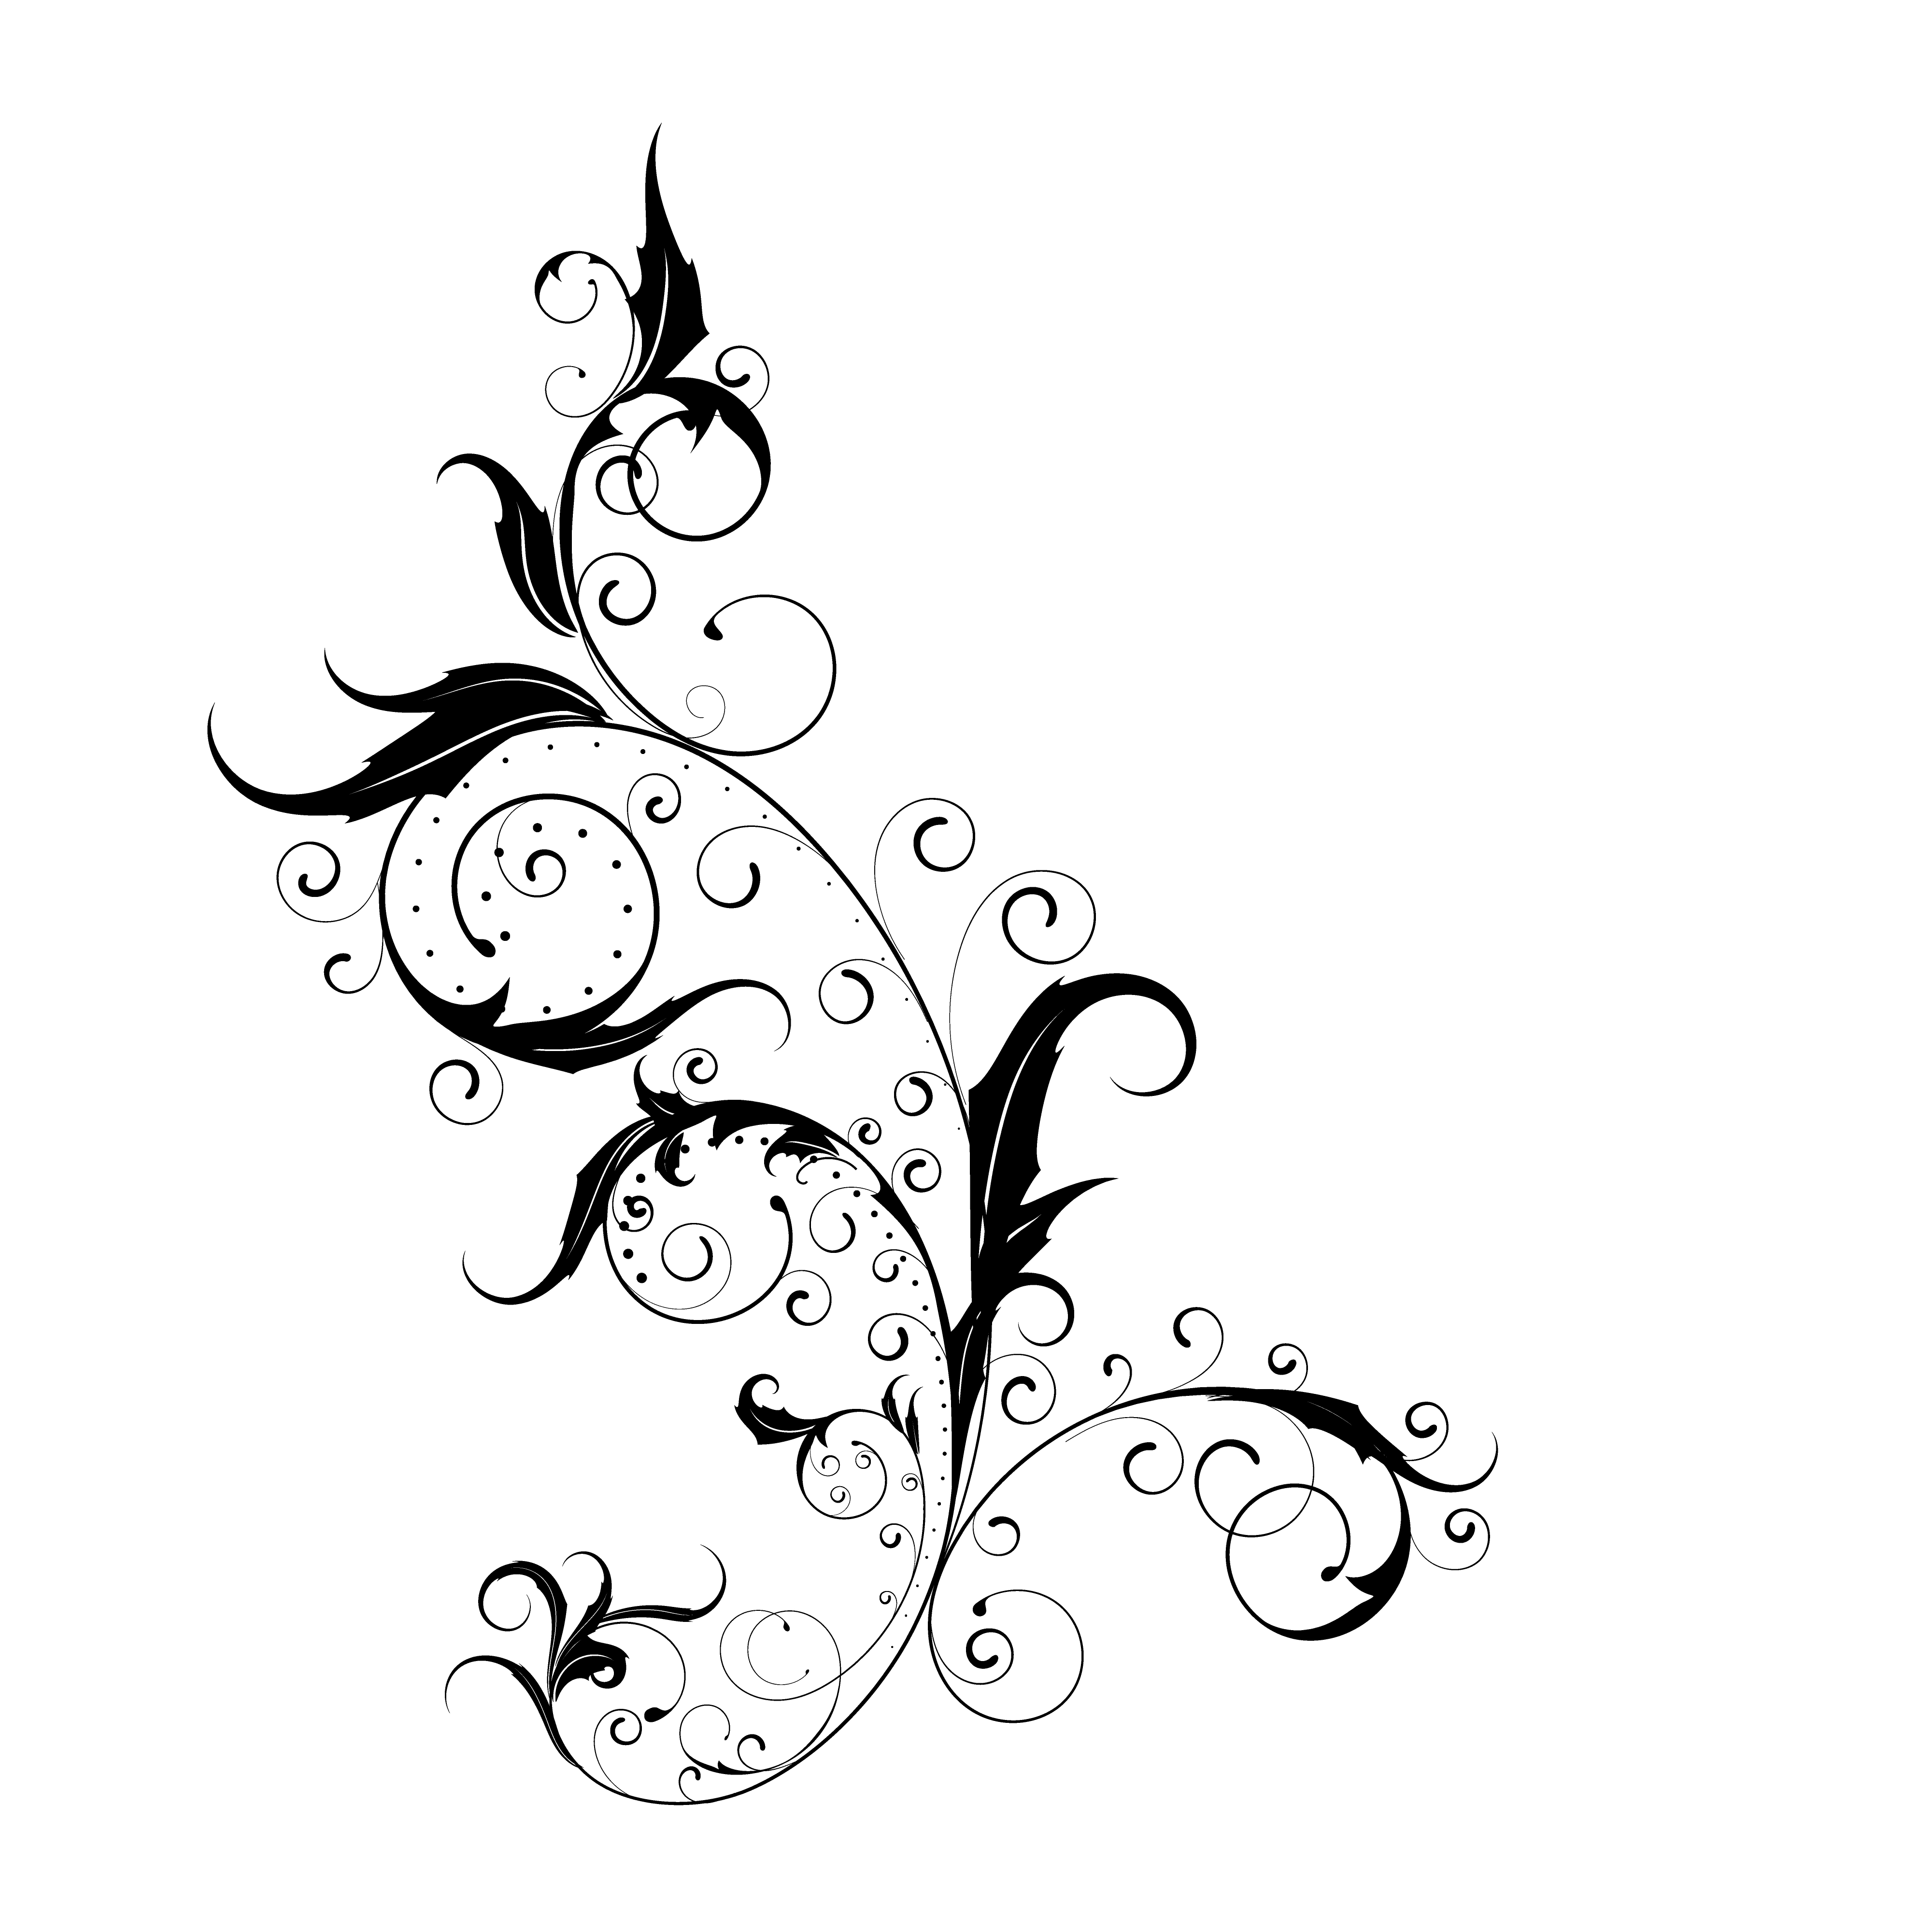 Download Flowers ornamental beautiful and swirls design element silhouette in black. 340944 - Download ...